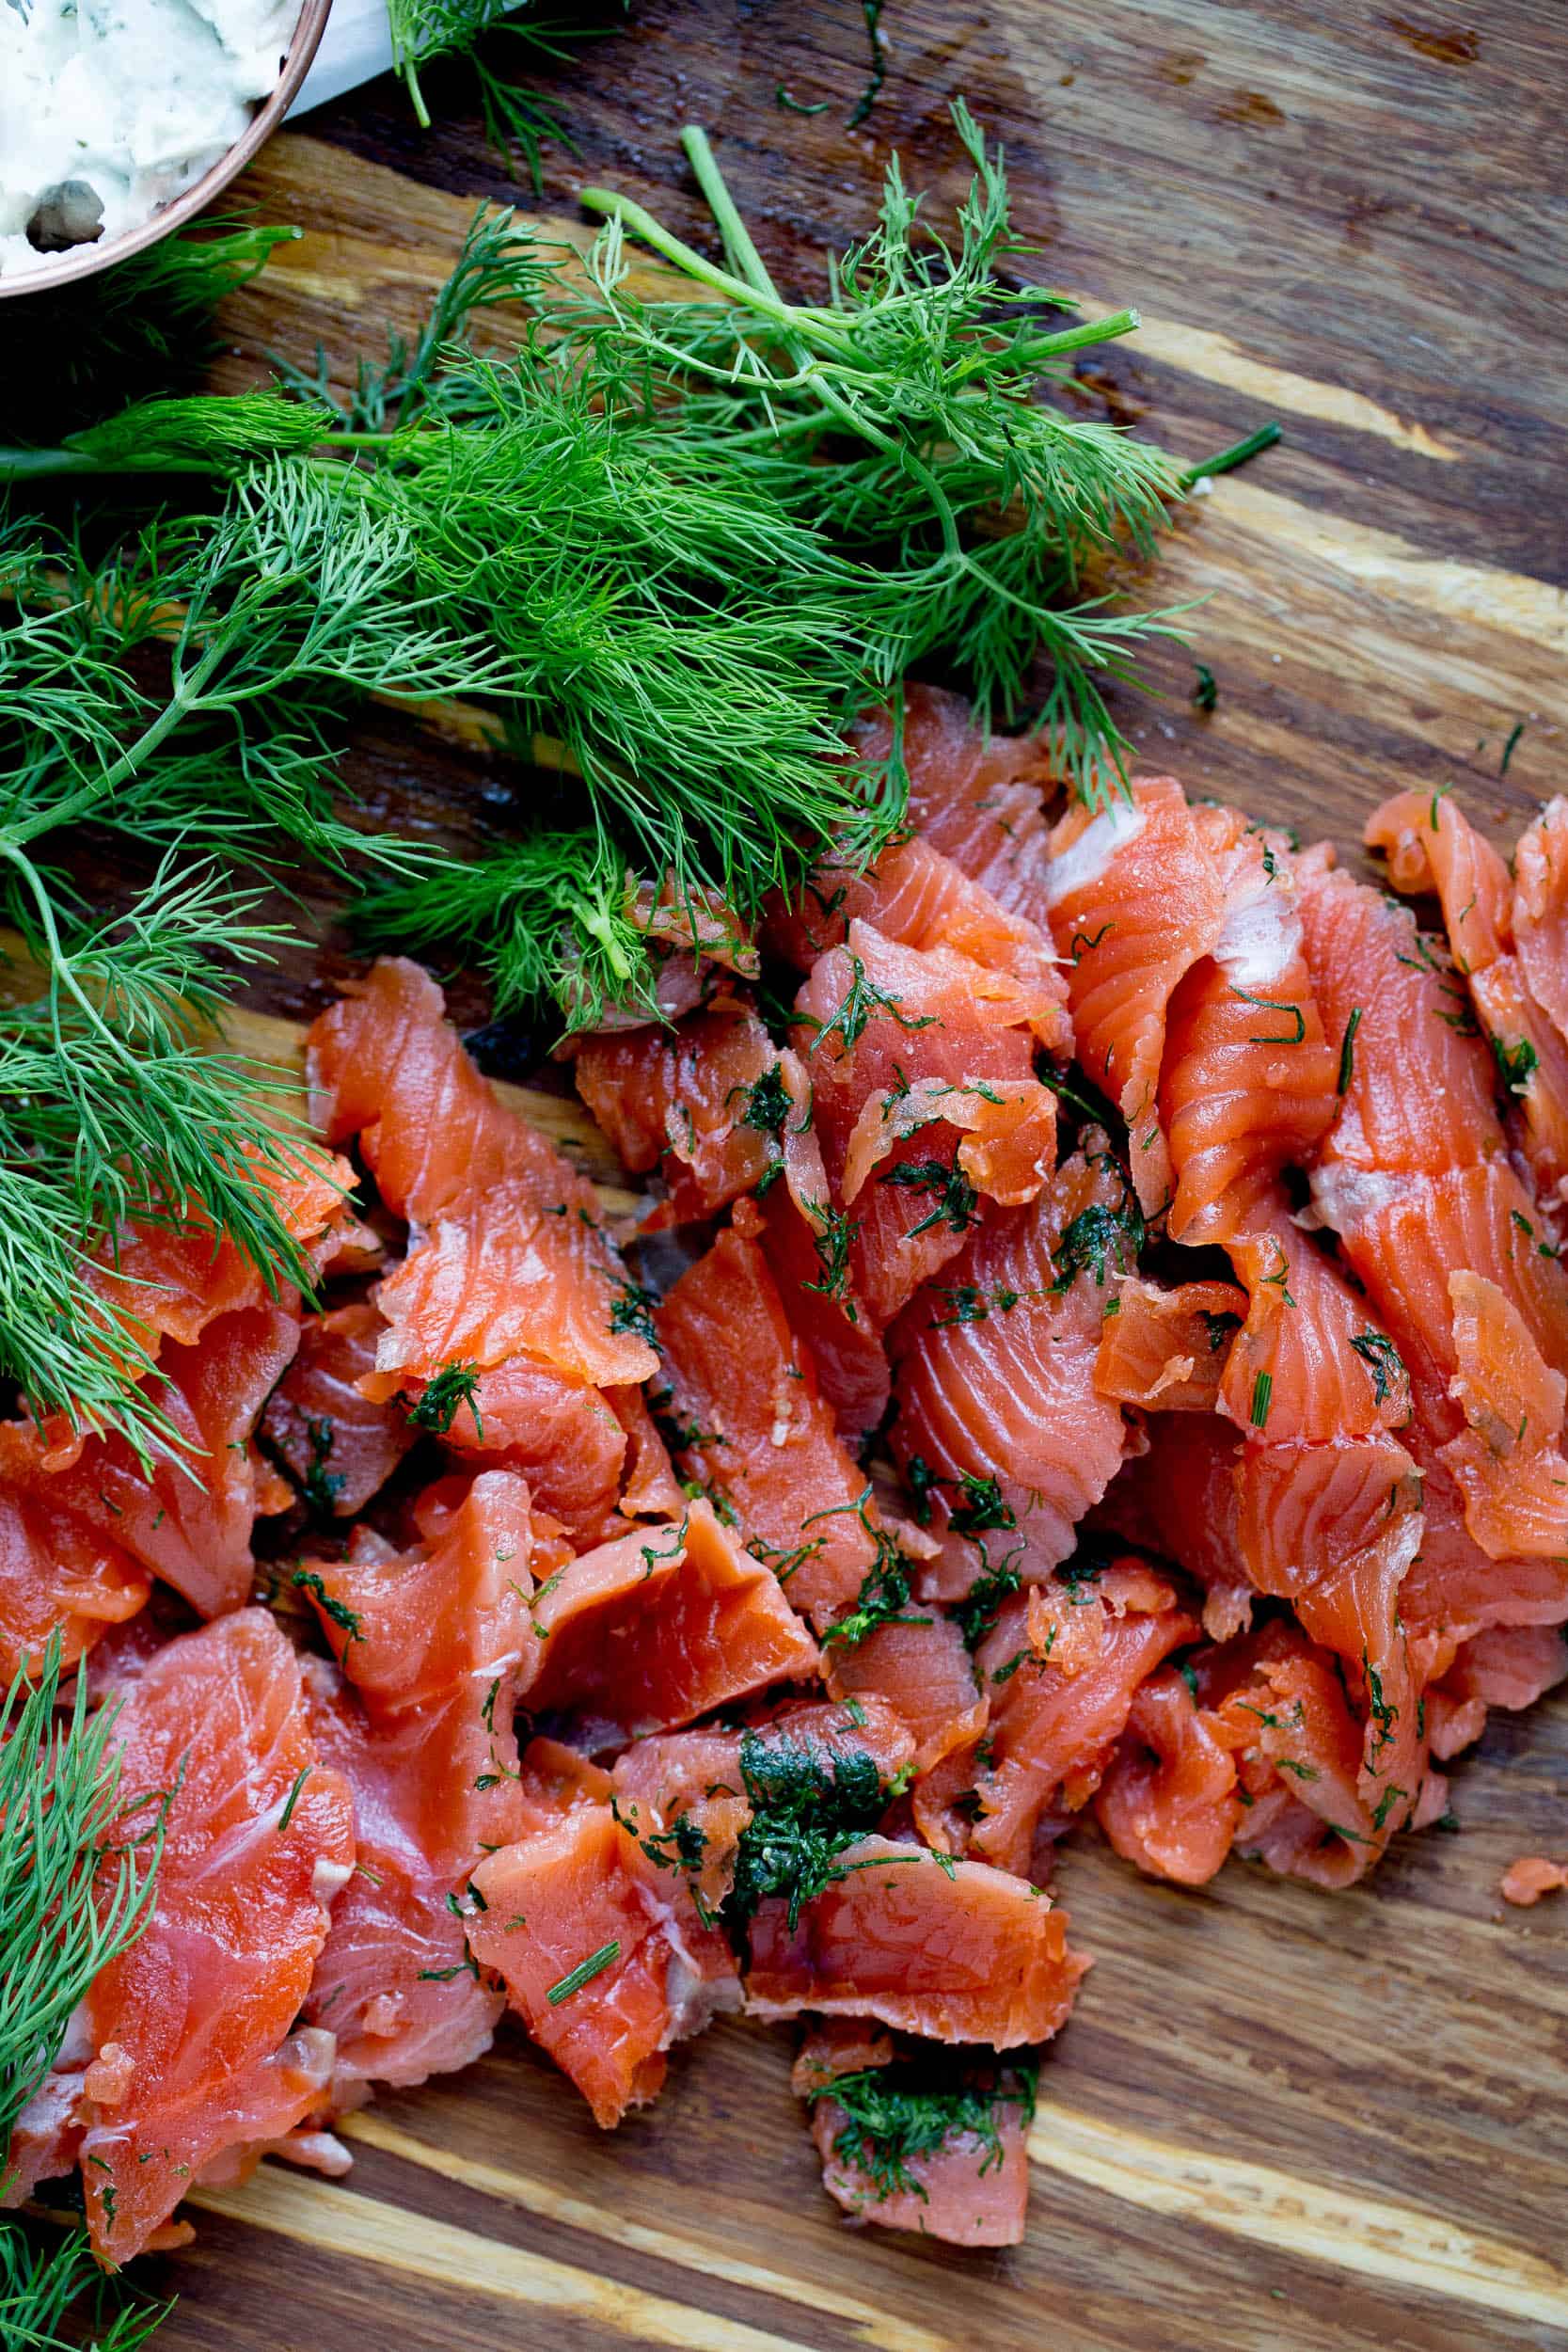 How to Make Cured Salmon (Gravlax) - Perry's Plate